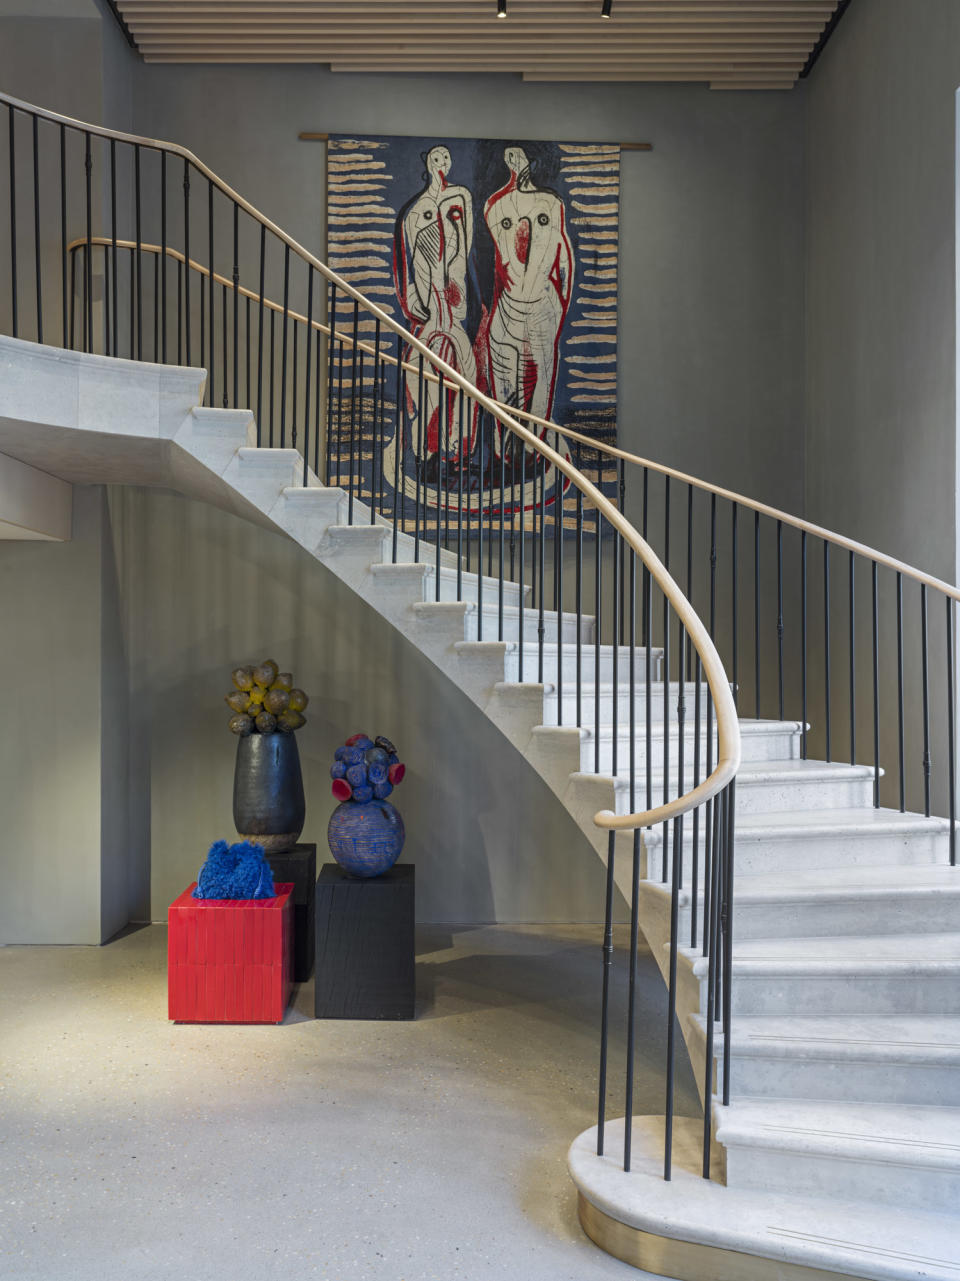 A Henry Moore tapestry punctuates the Georgian-style staircase. - Credit: Courtesy of Loewe